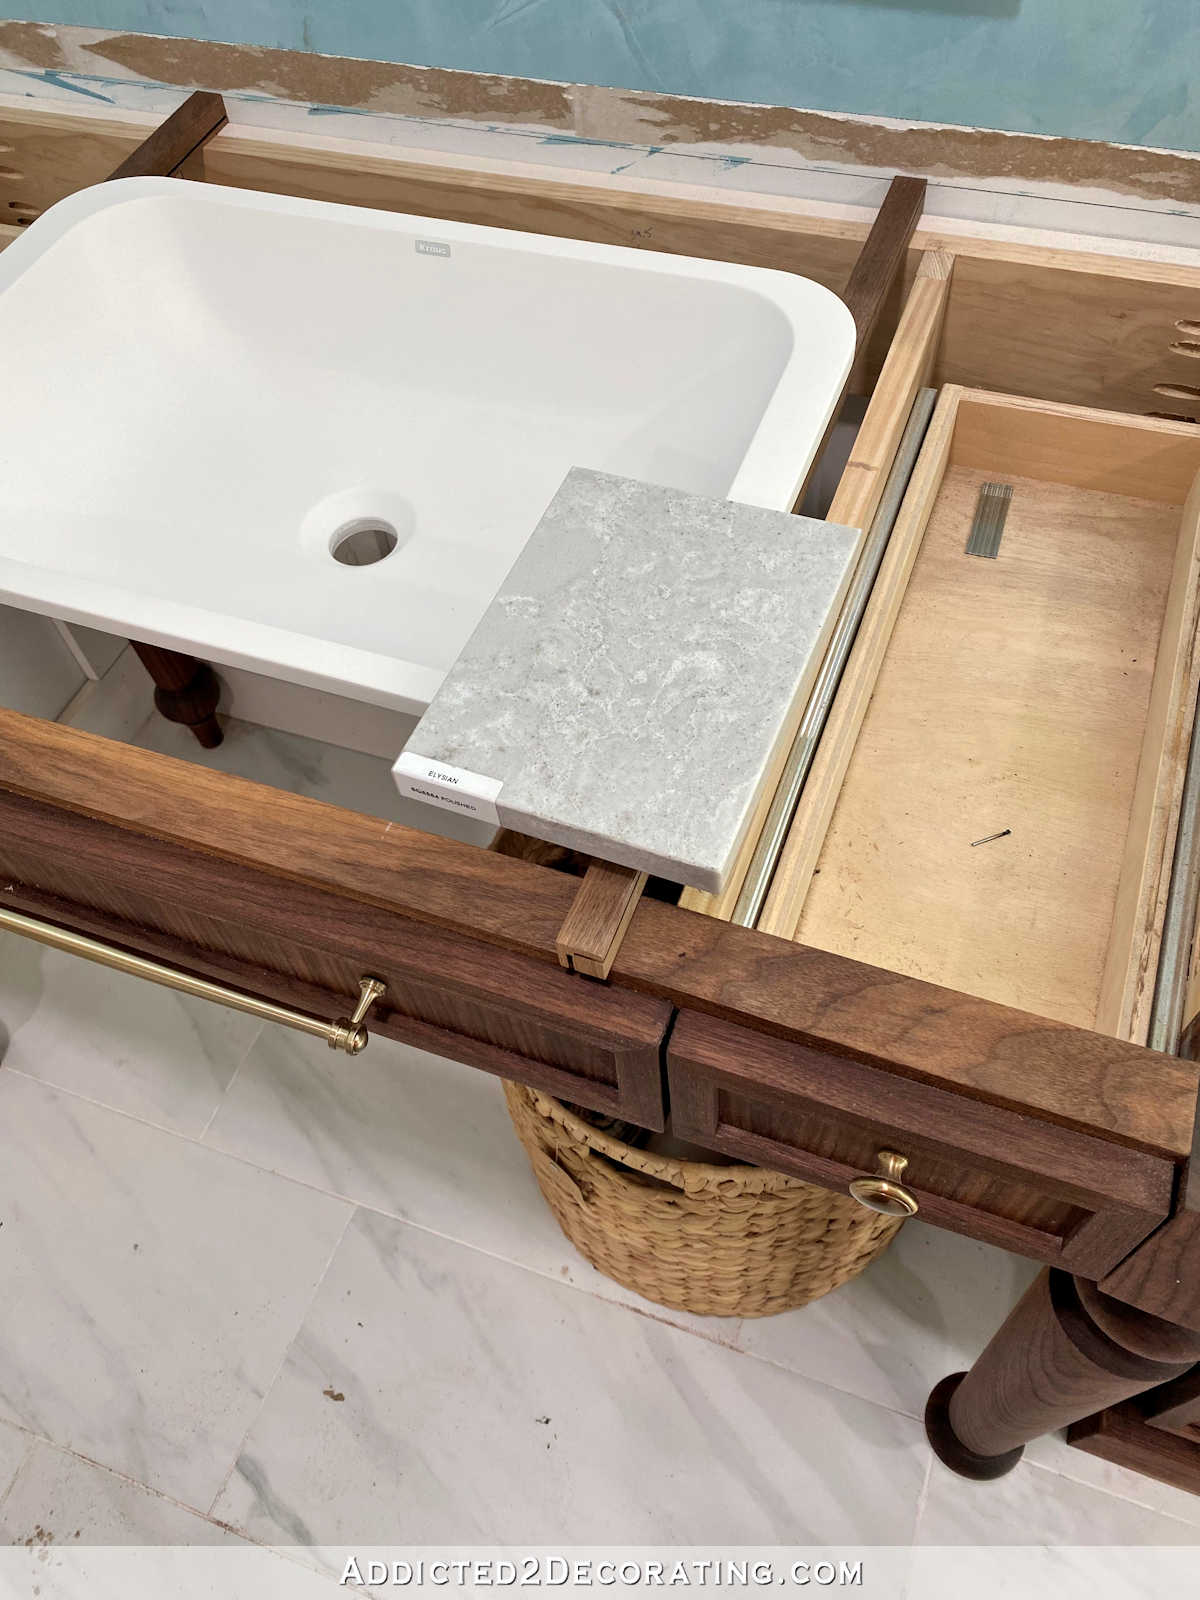 And The Winner For Our Bathroom Quartz Countertops Is…